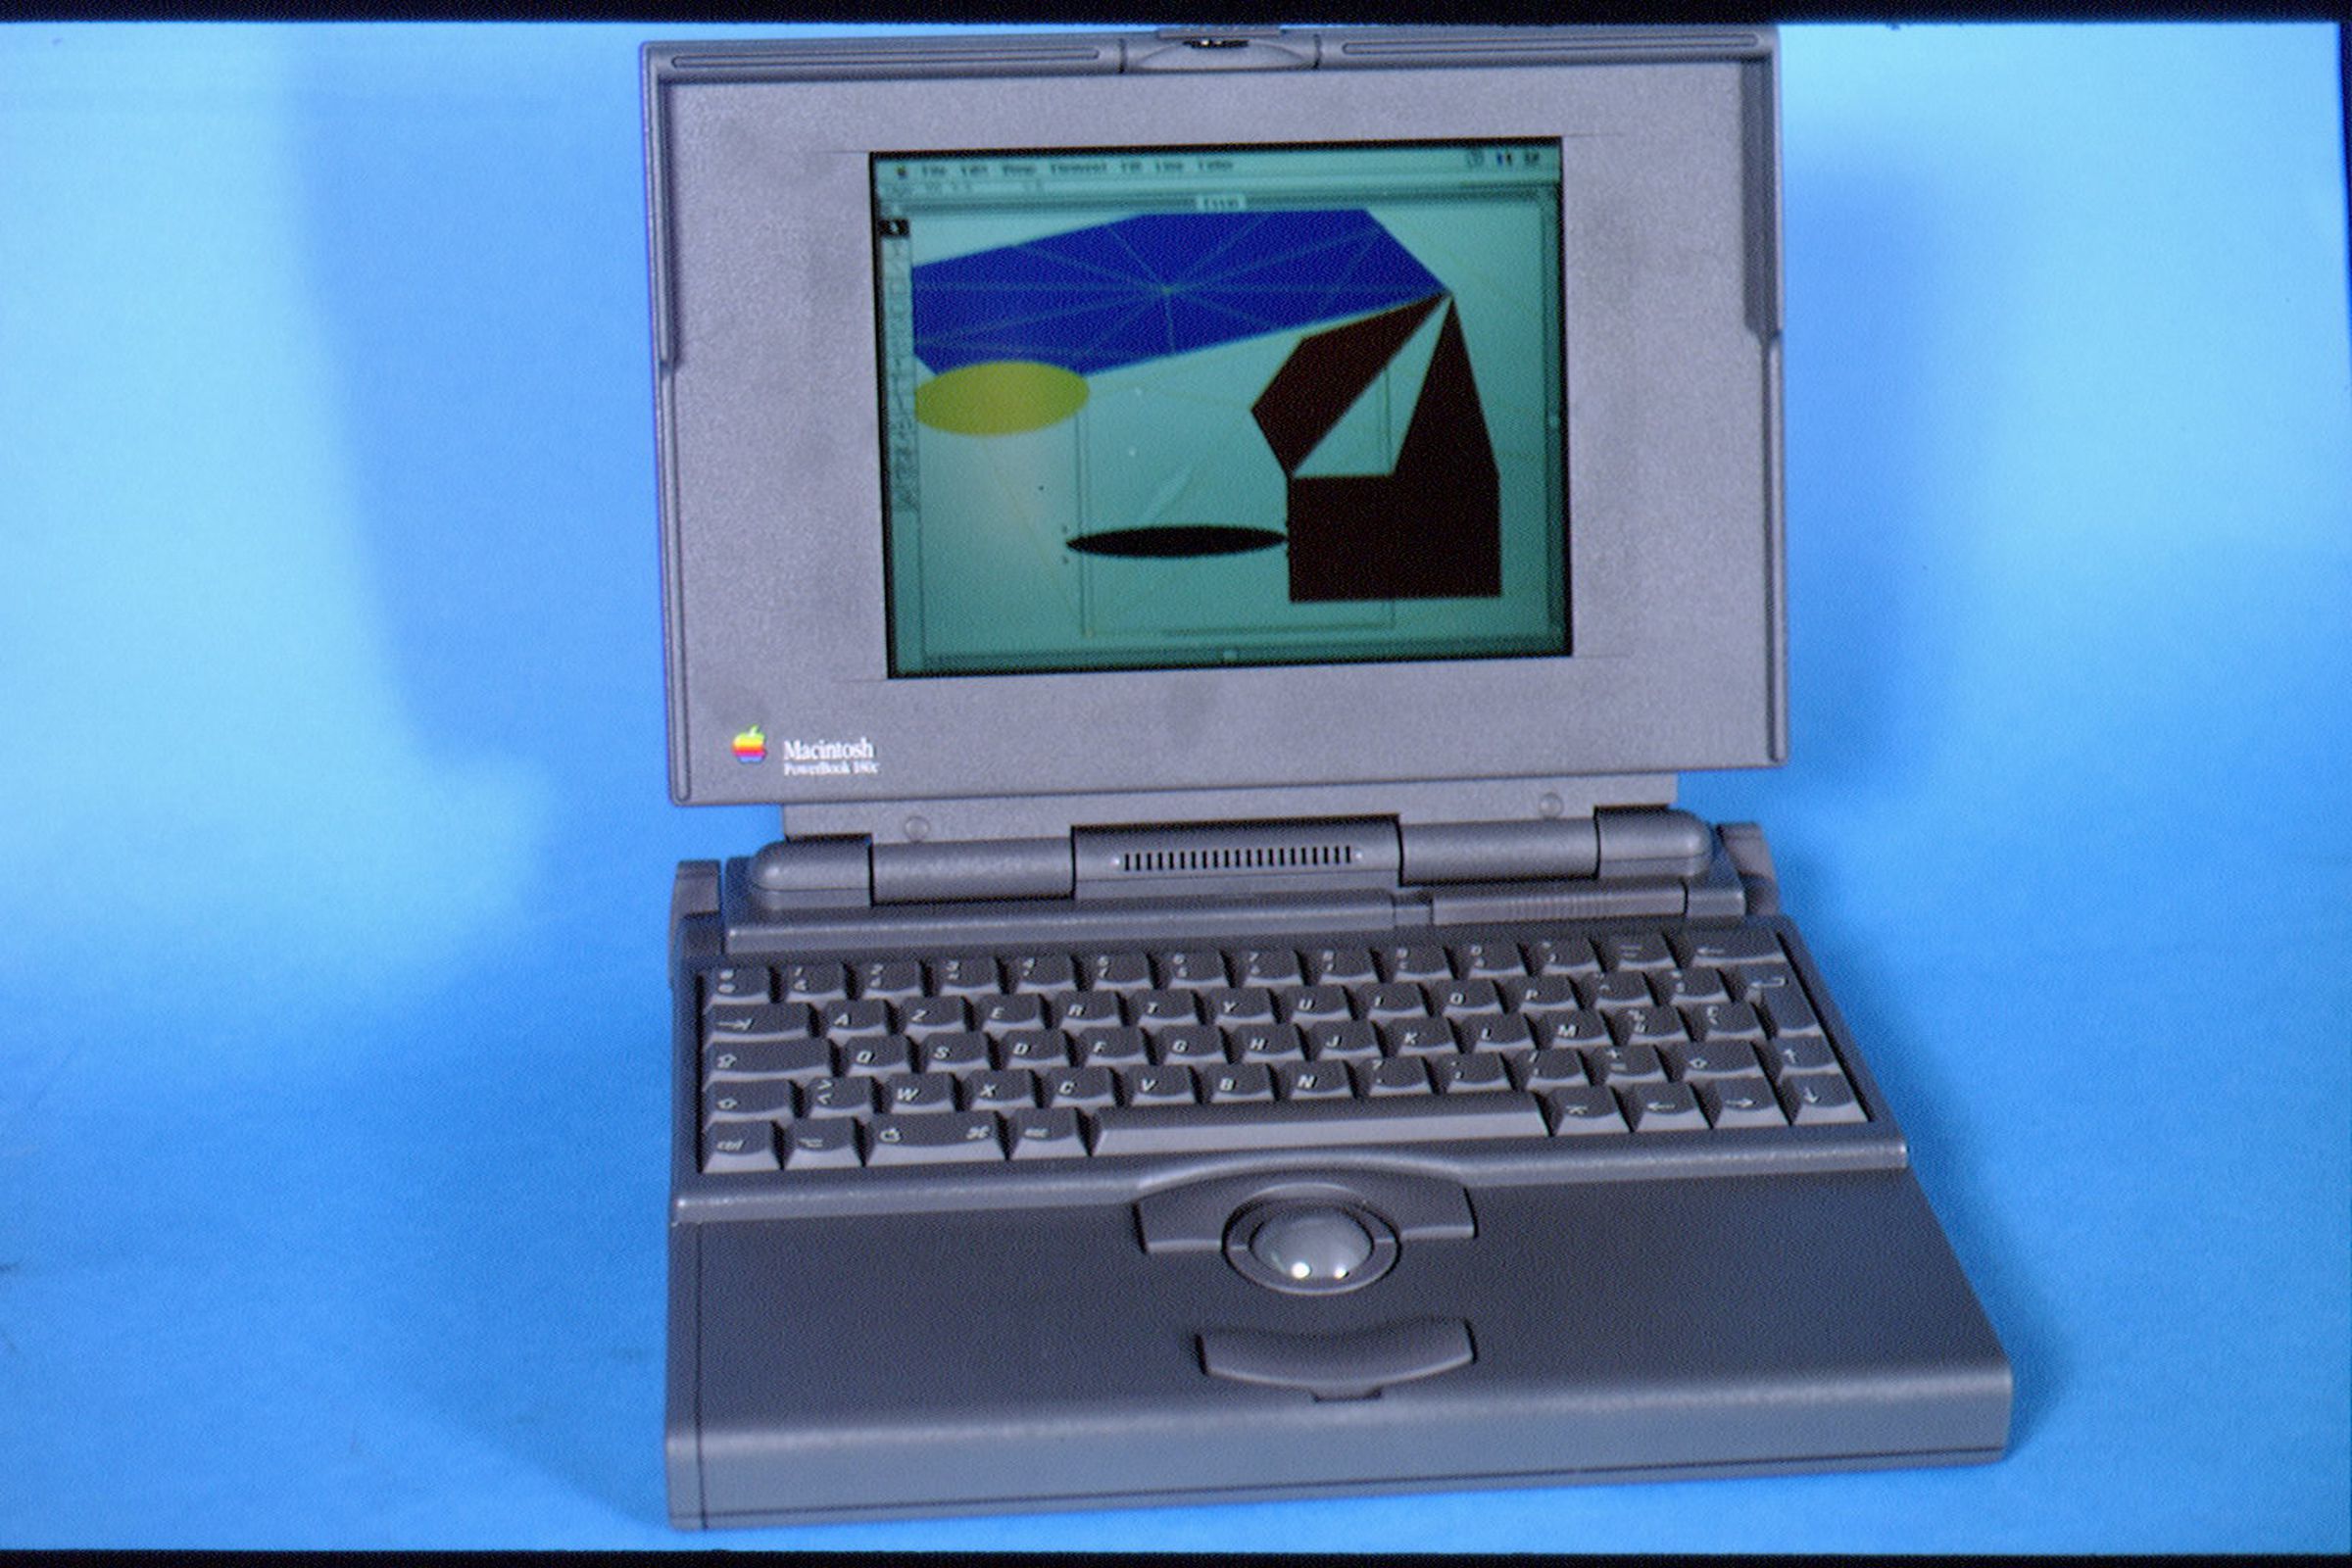 An Apple Powerbook sitting against a blue background.